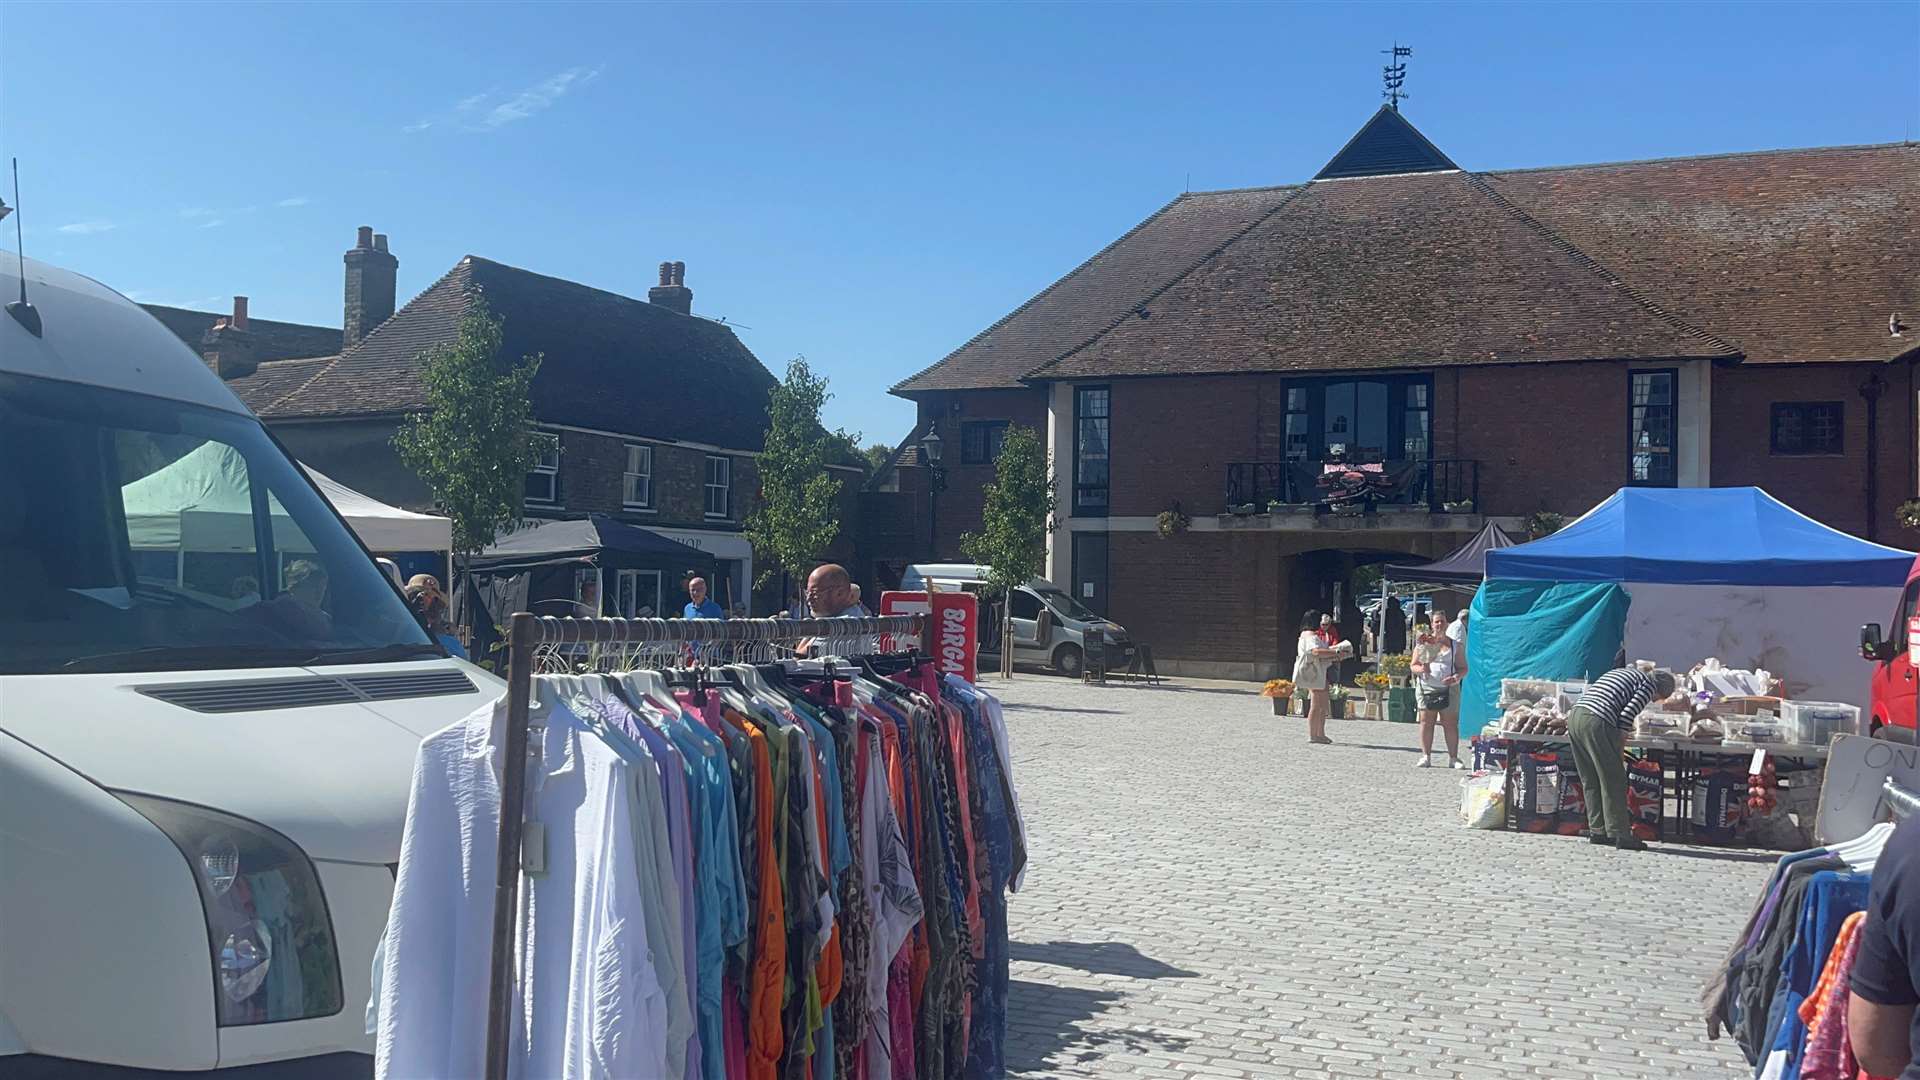 The Thursday morning market is now back at Guildhall Square in Sandwich